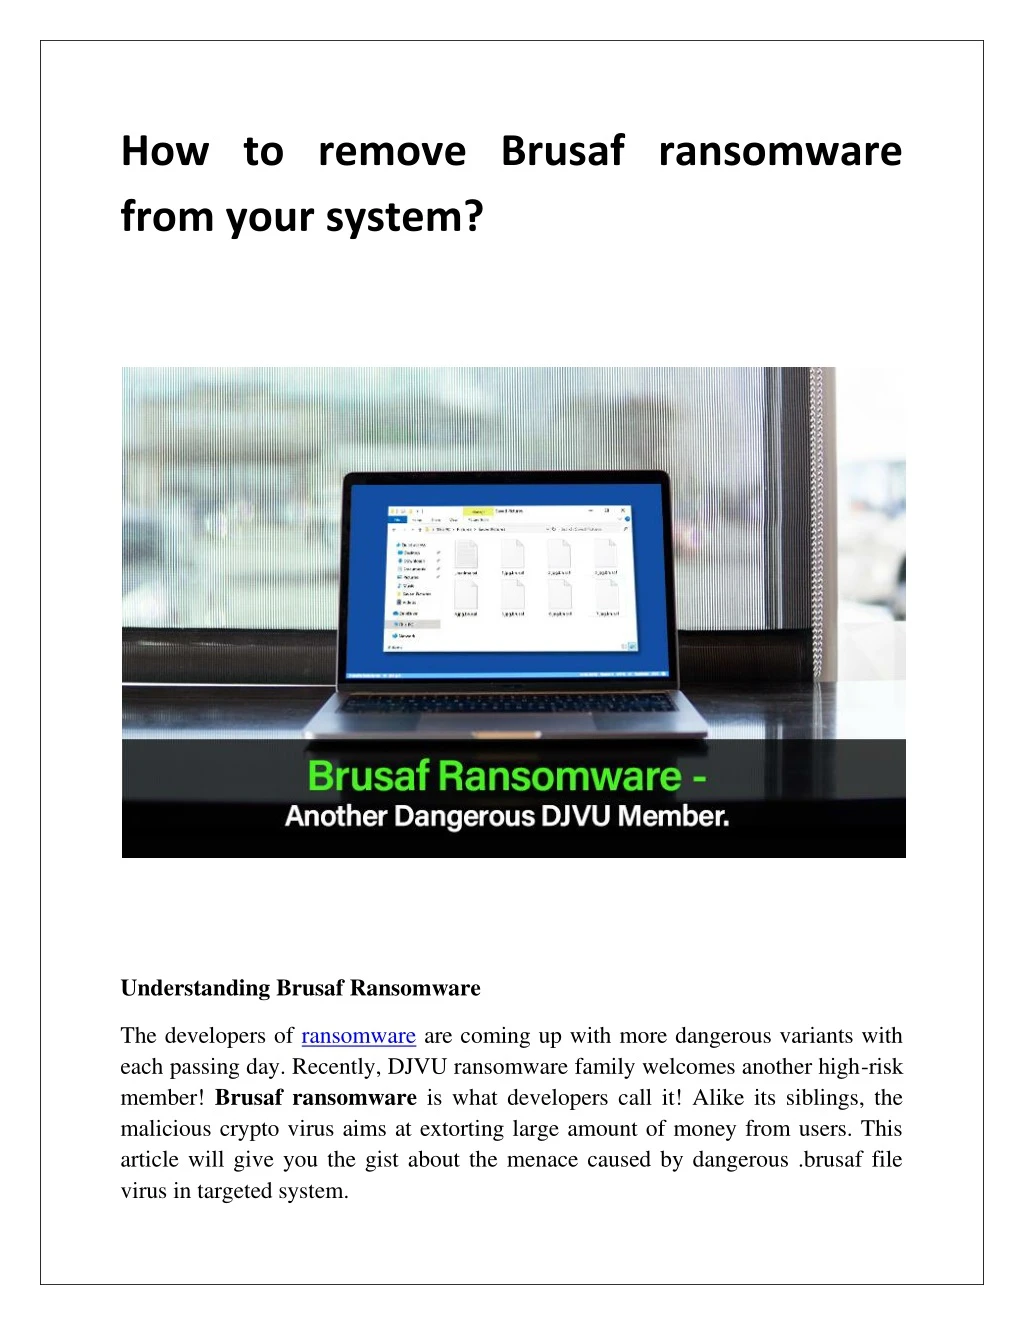 how to remove brusaf ransomware from your system